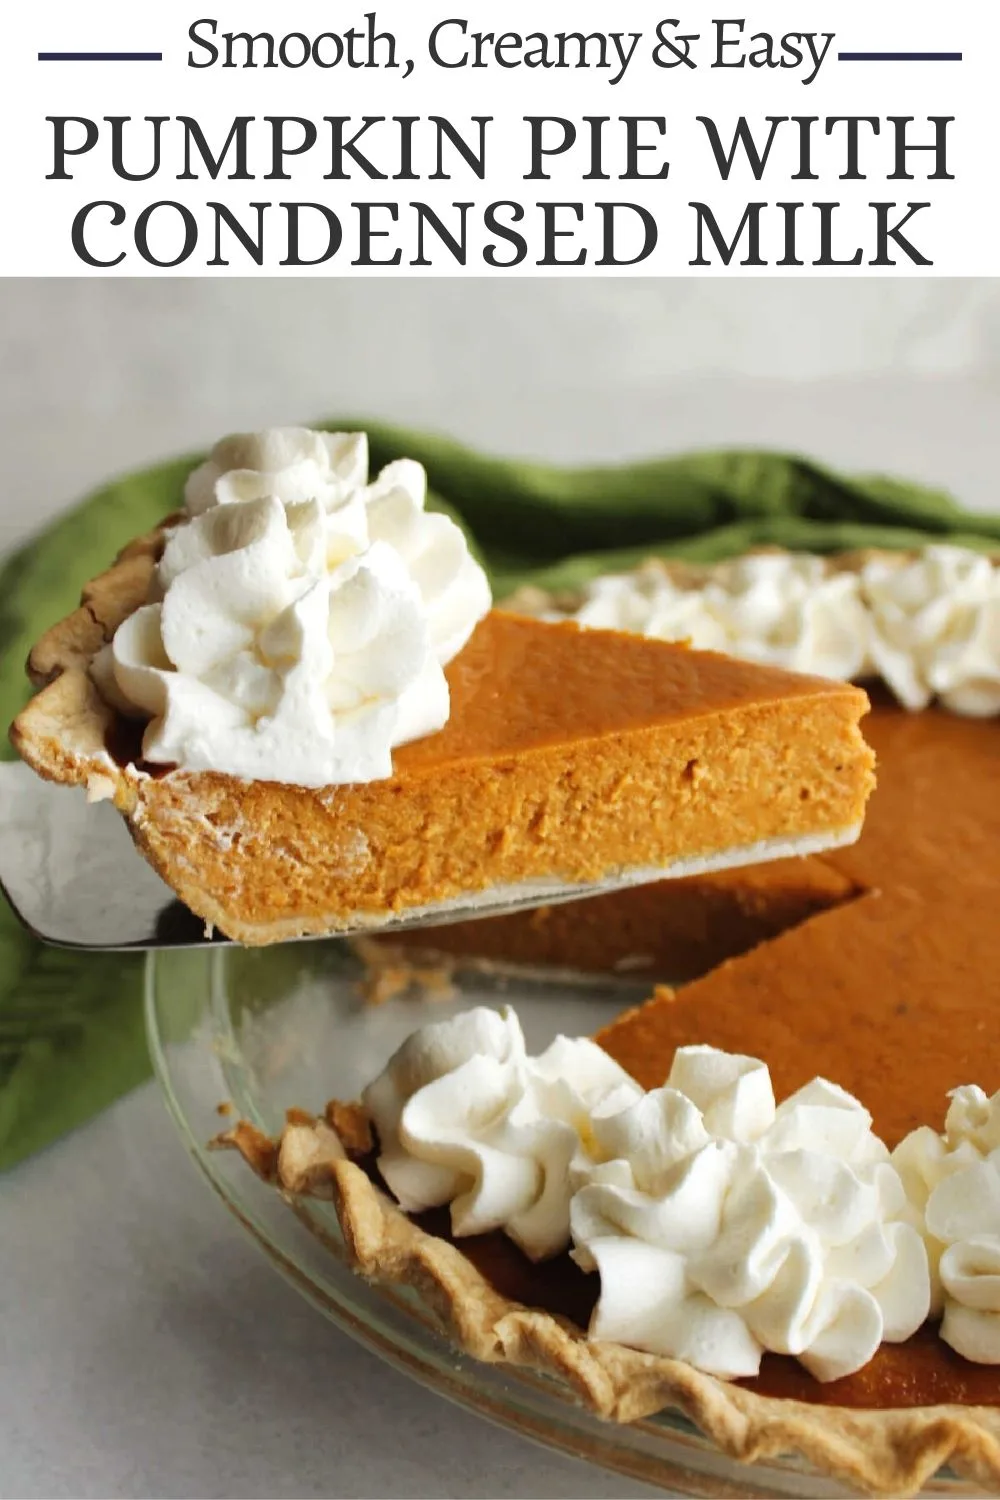 This simple pumpkin pie recipe is made with sweetened condensed milk, so you know it's going to be good! It only takes a few ingredients and tastes amazing. 